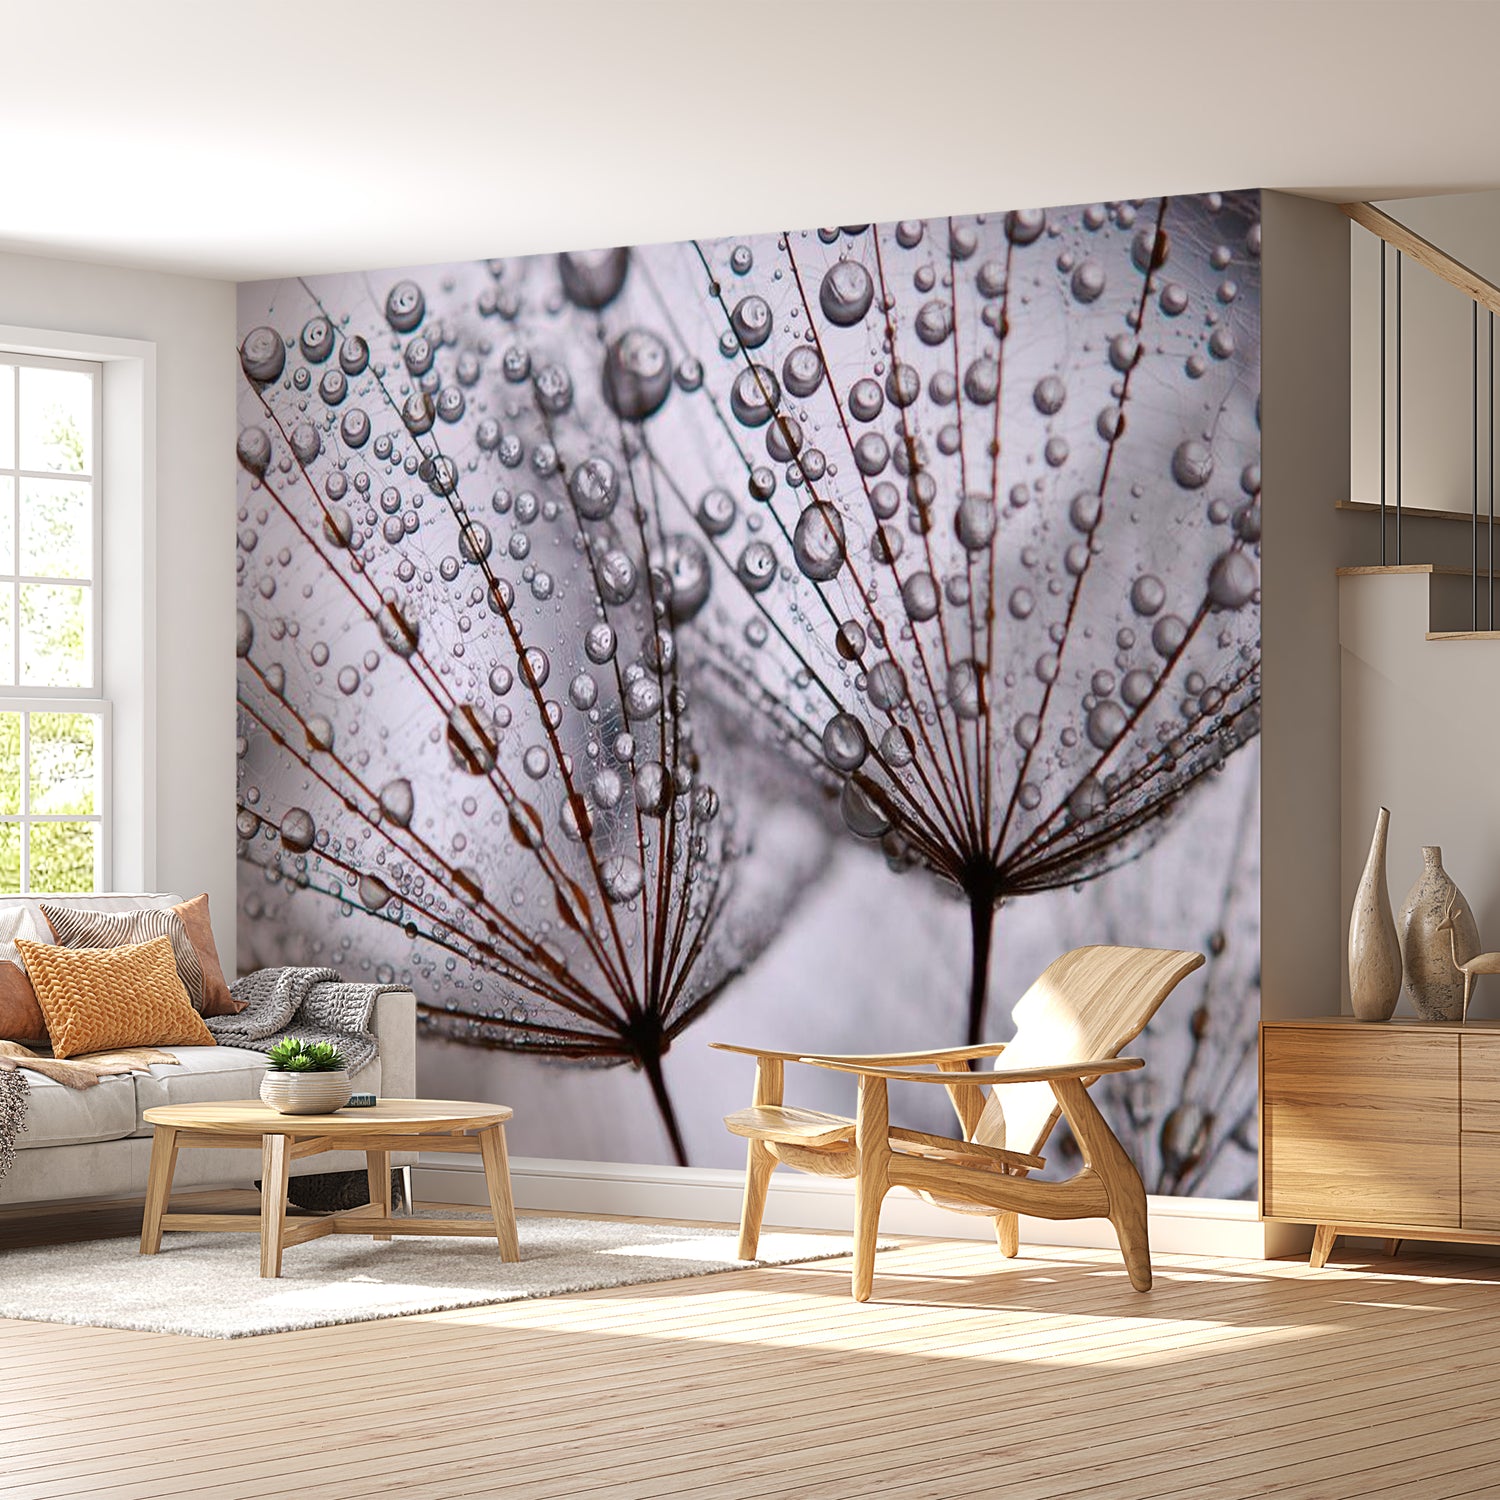 Floral Wallpaper Wall Mural - Dandelion And Morning Dew